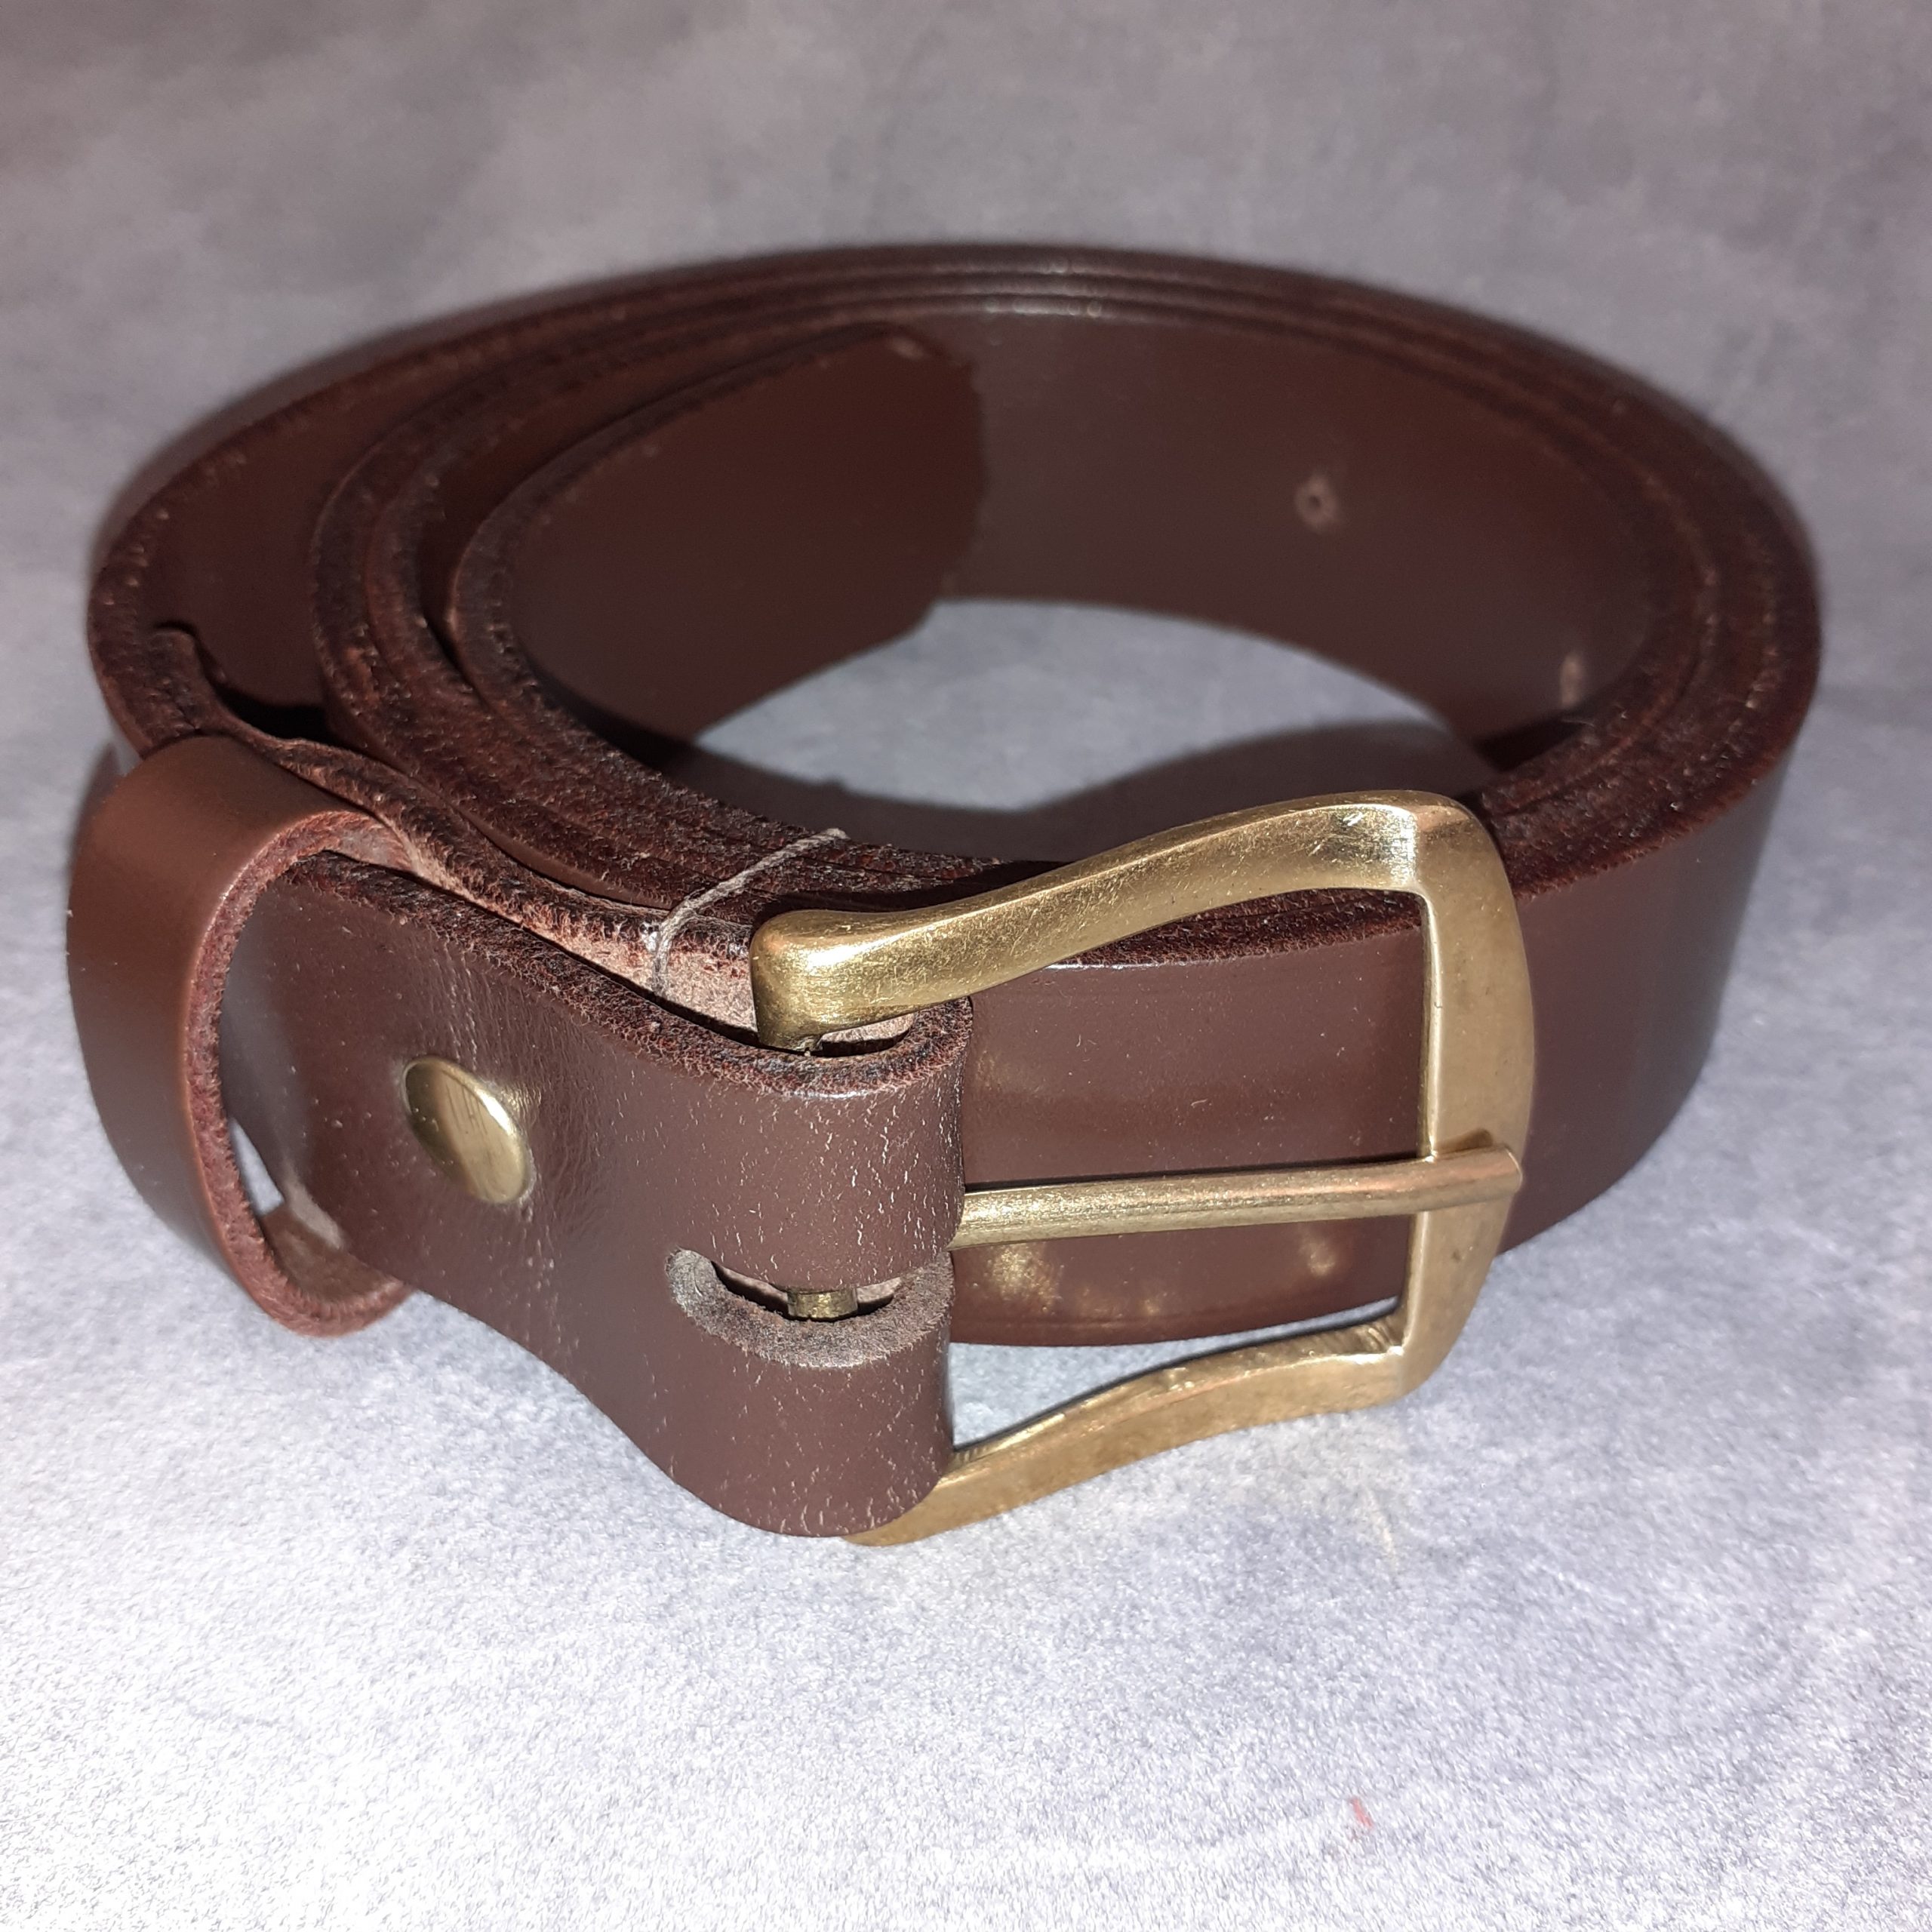 Top Quality Leather Waist Belt (Sports Buckle)in S, M & L Sizes - John ...